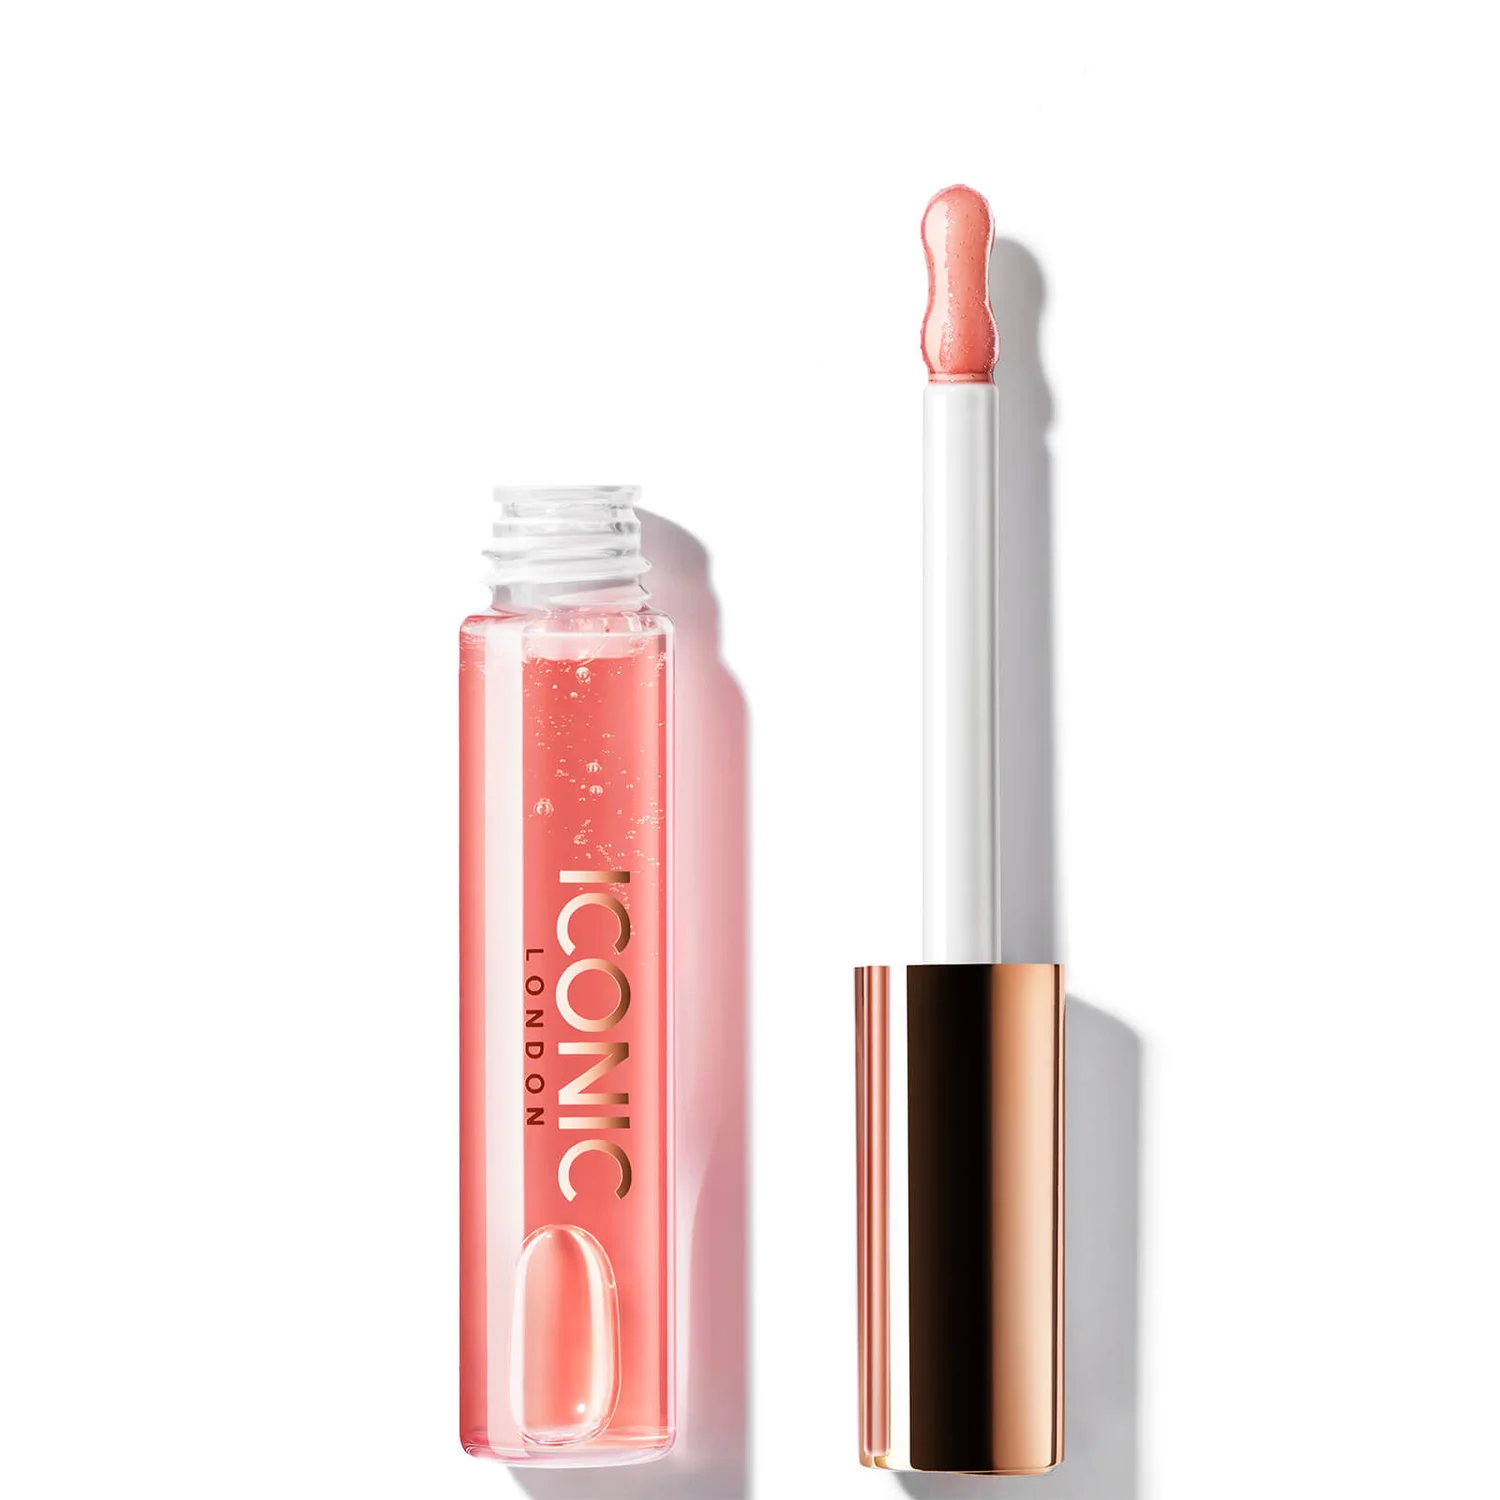 ICONIC London Lustre Lip Oil - She’s a Peach 6ml FREE UK DELIVERY OVER £25 1 Reviews , See all reviews RRP: £21.00 £15.75